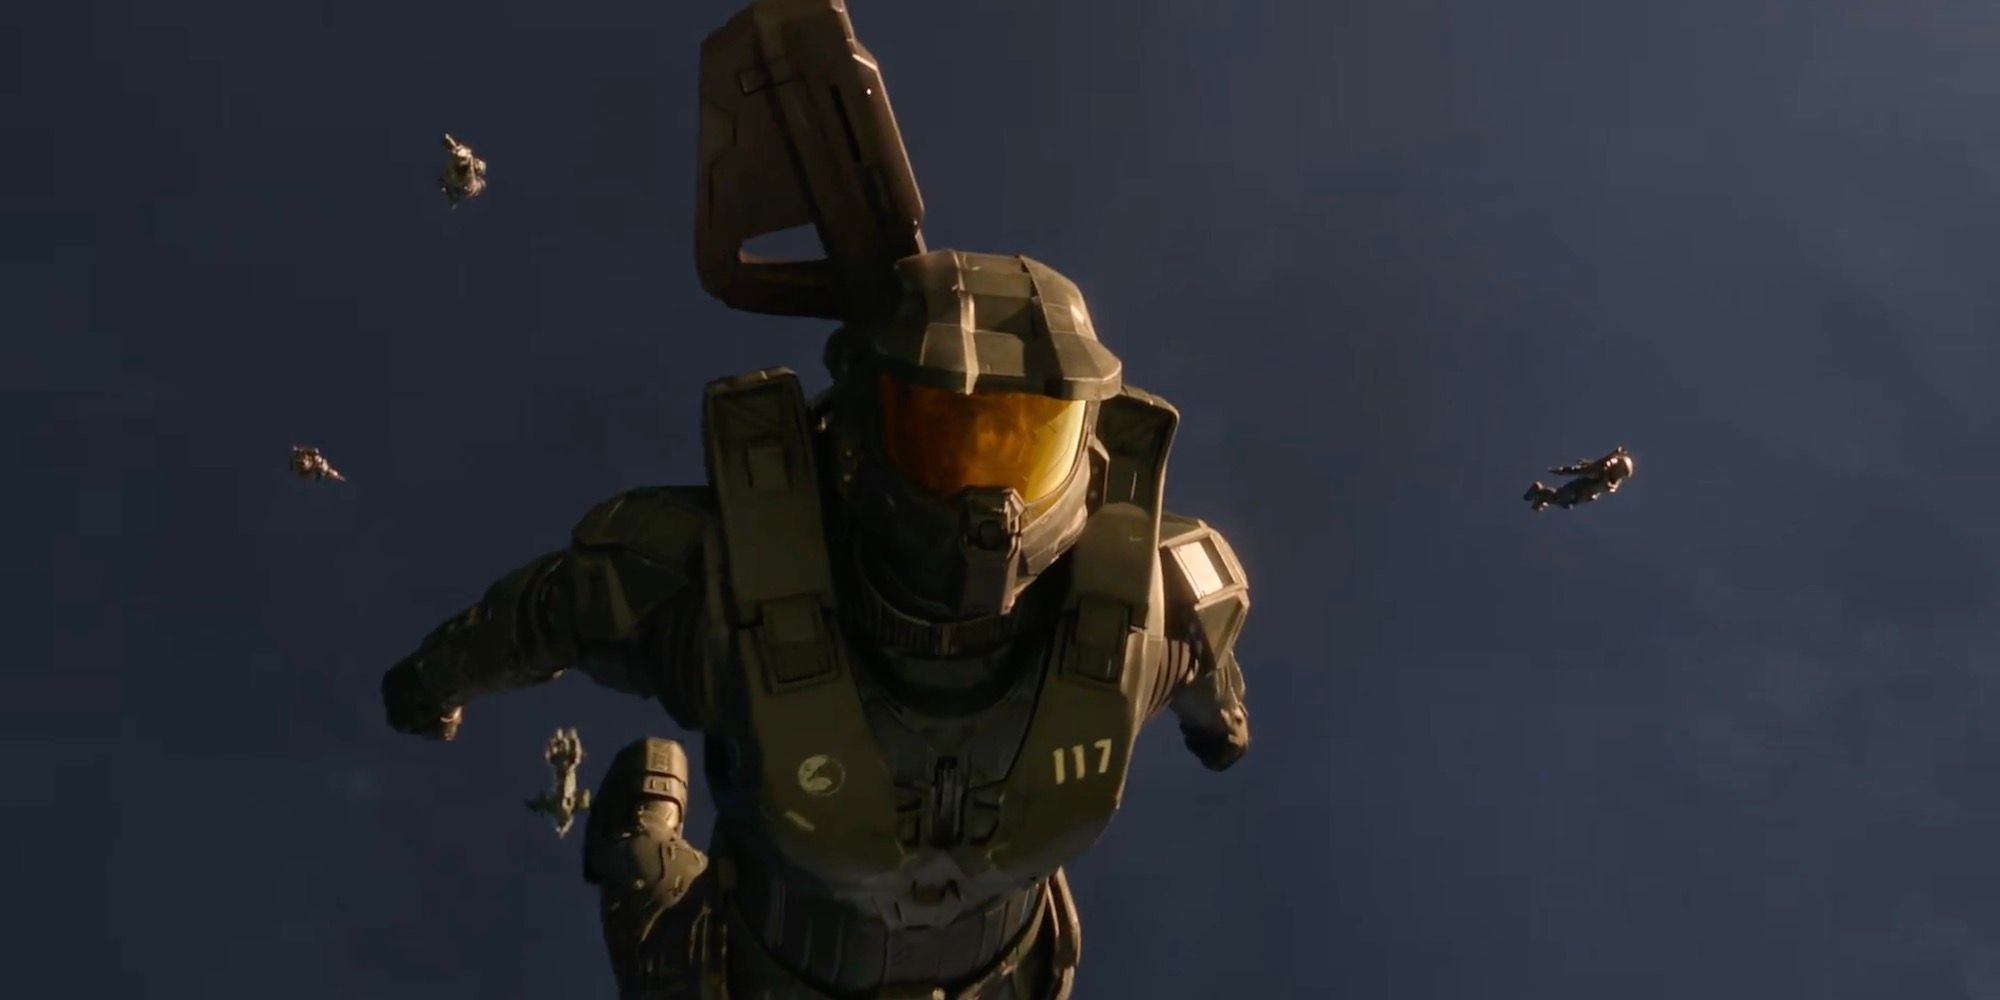 Master Chief sky diving in the Halo TV show